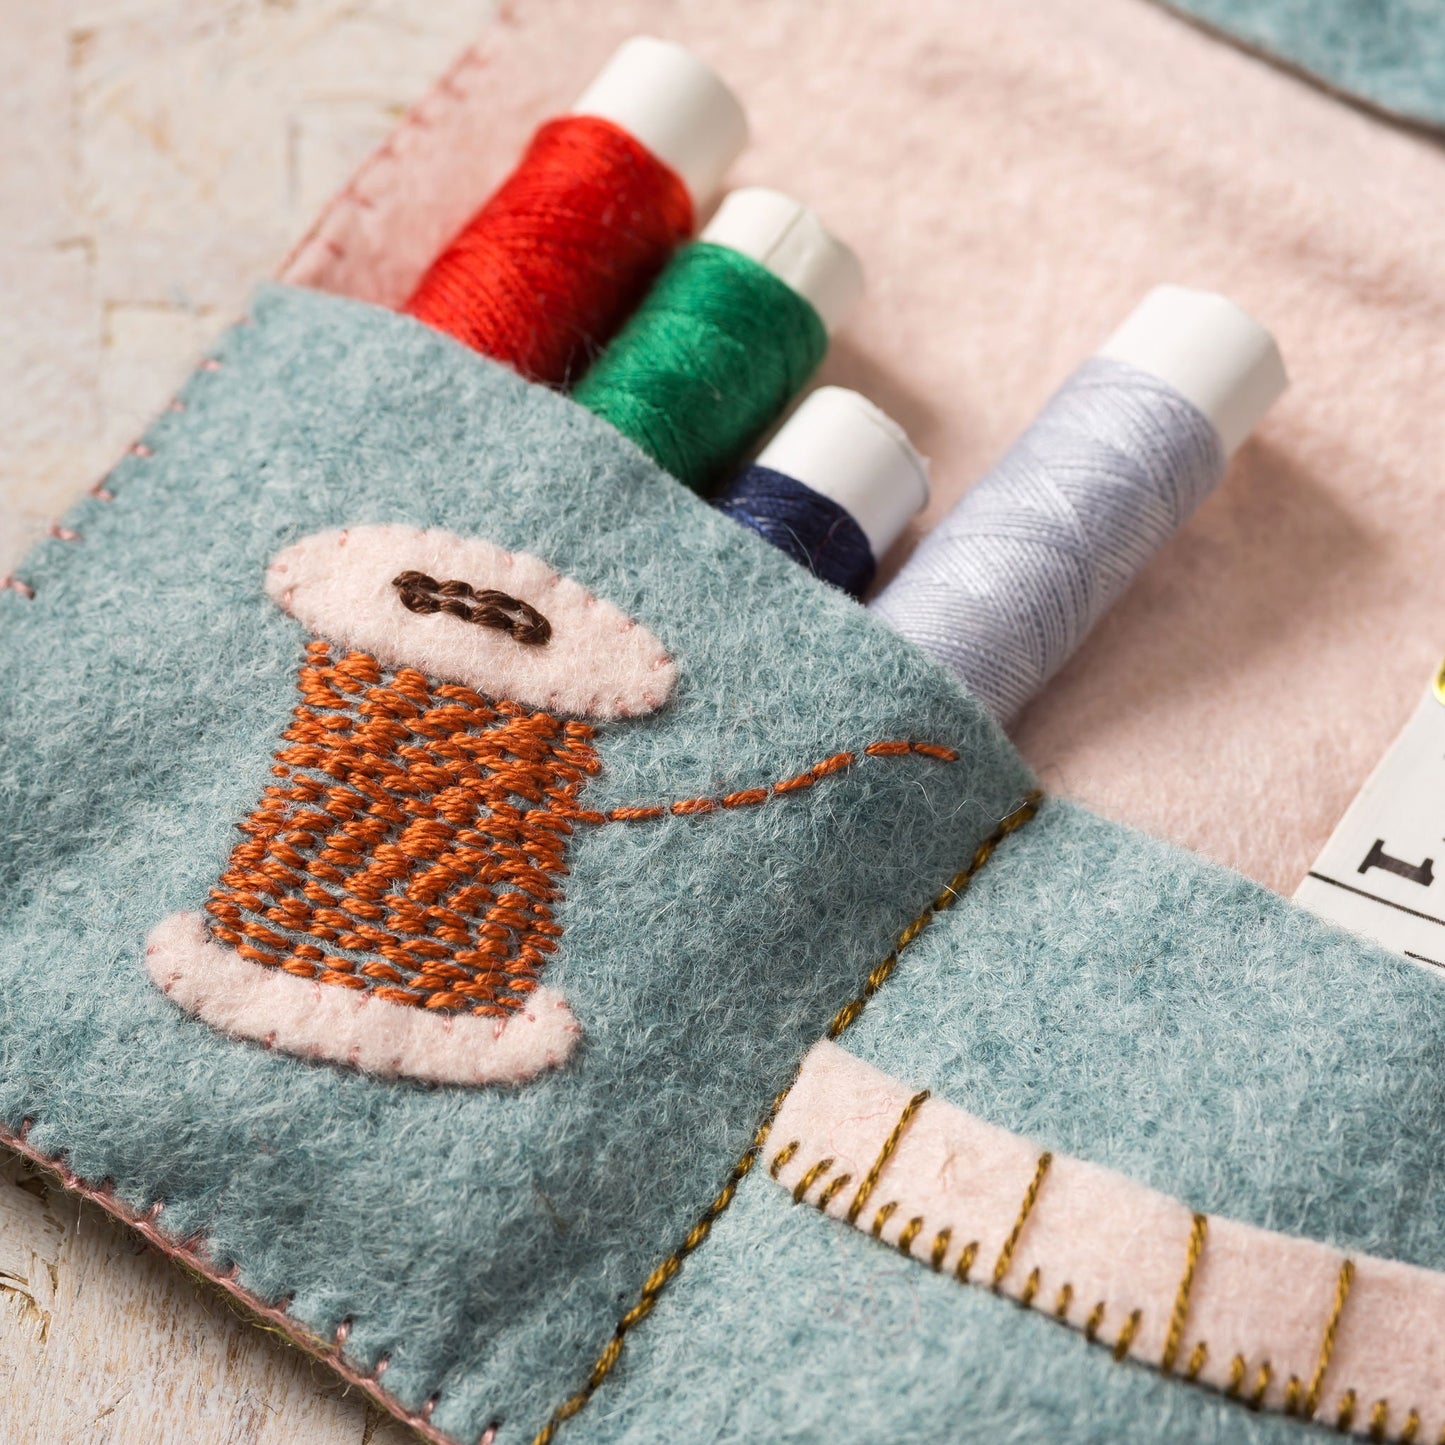 Sewing Roll Felt Craft Kit By Corinne Lapierre